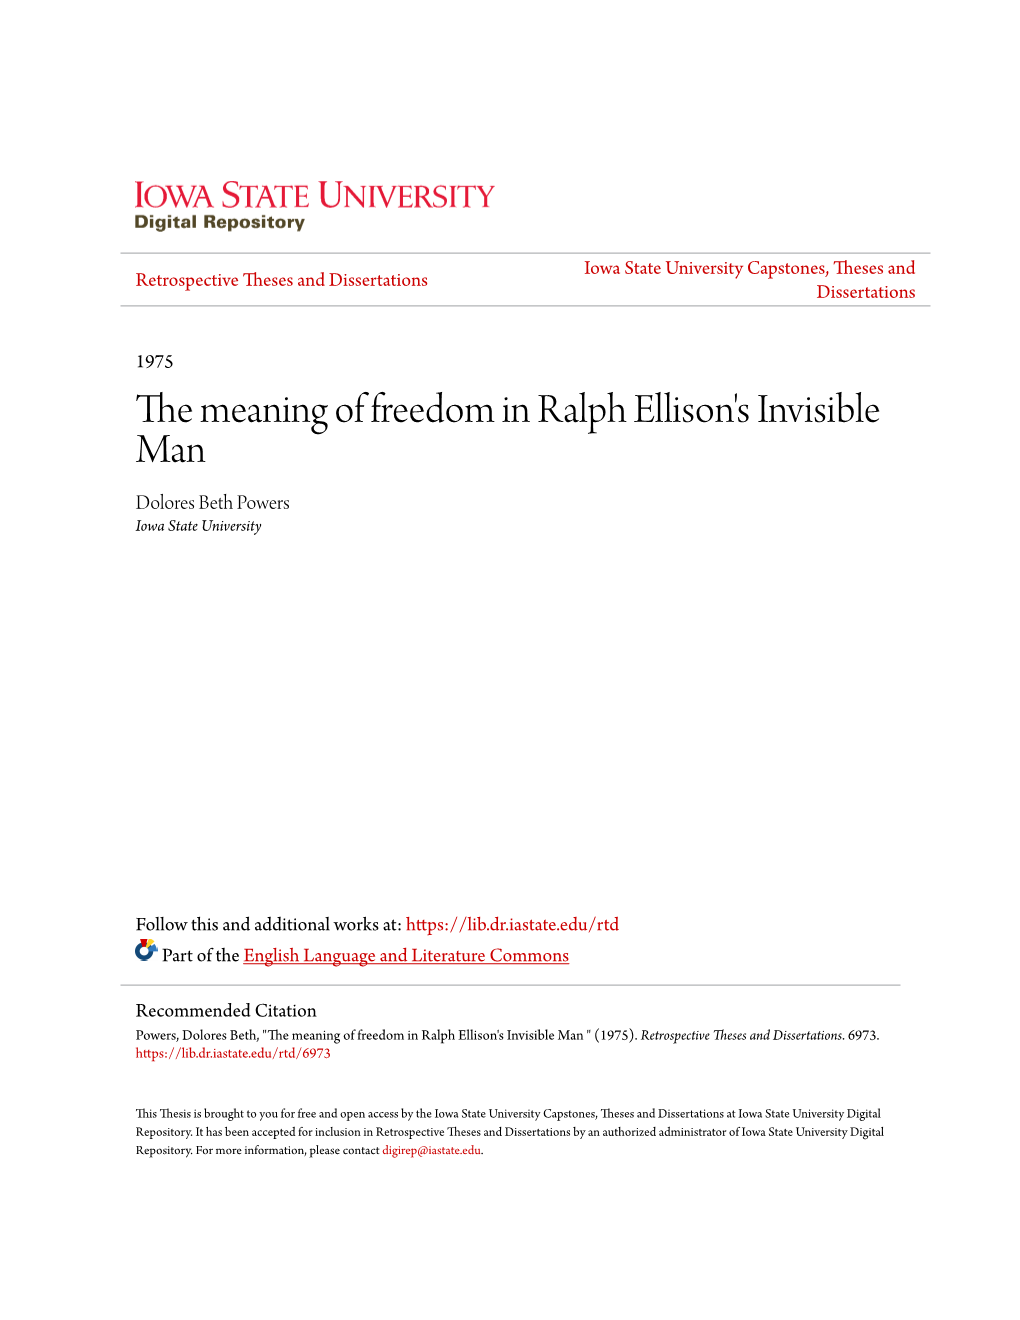 The Meaning of Freedom in Ralph Ellison's Invisible Man Dolores Beth Powers Iowa State University